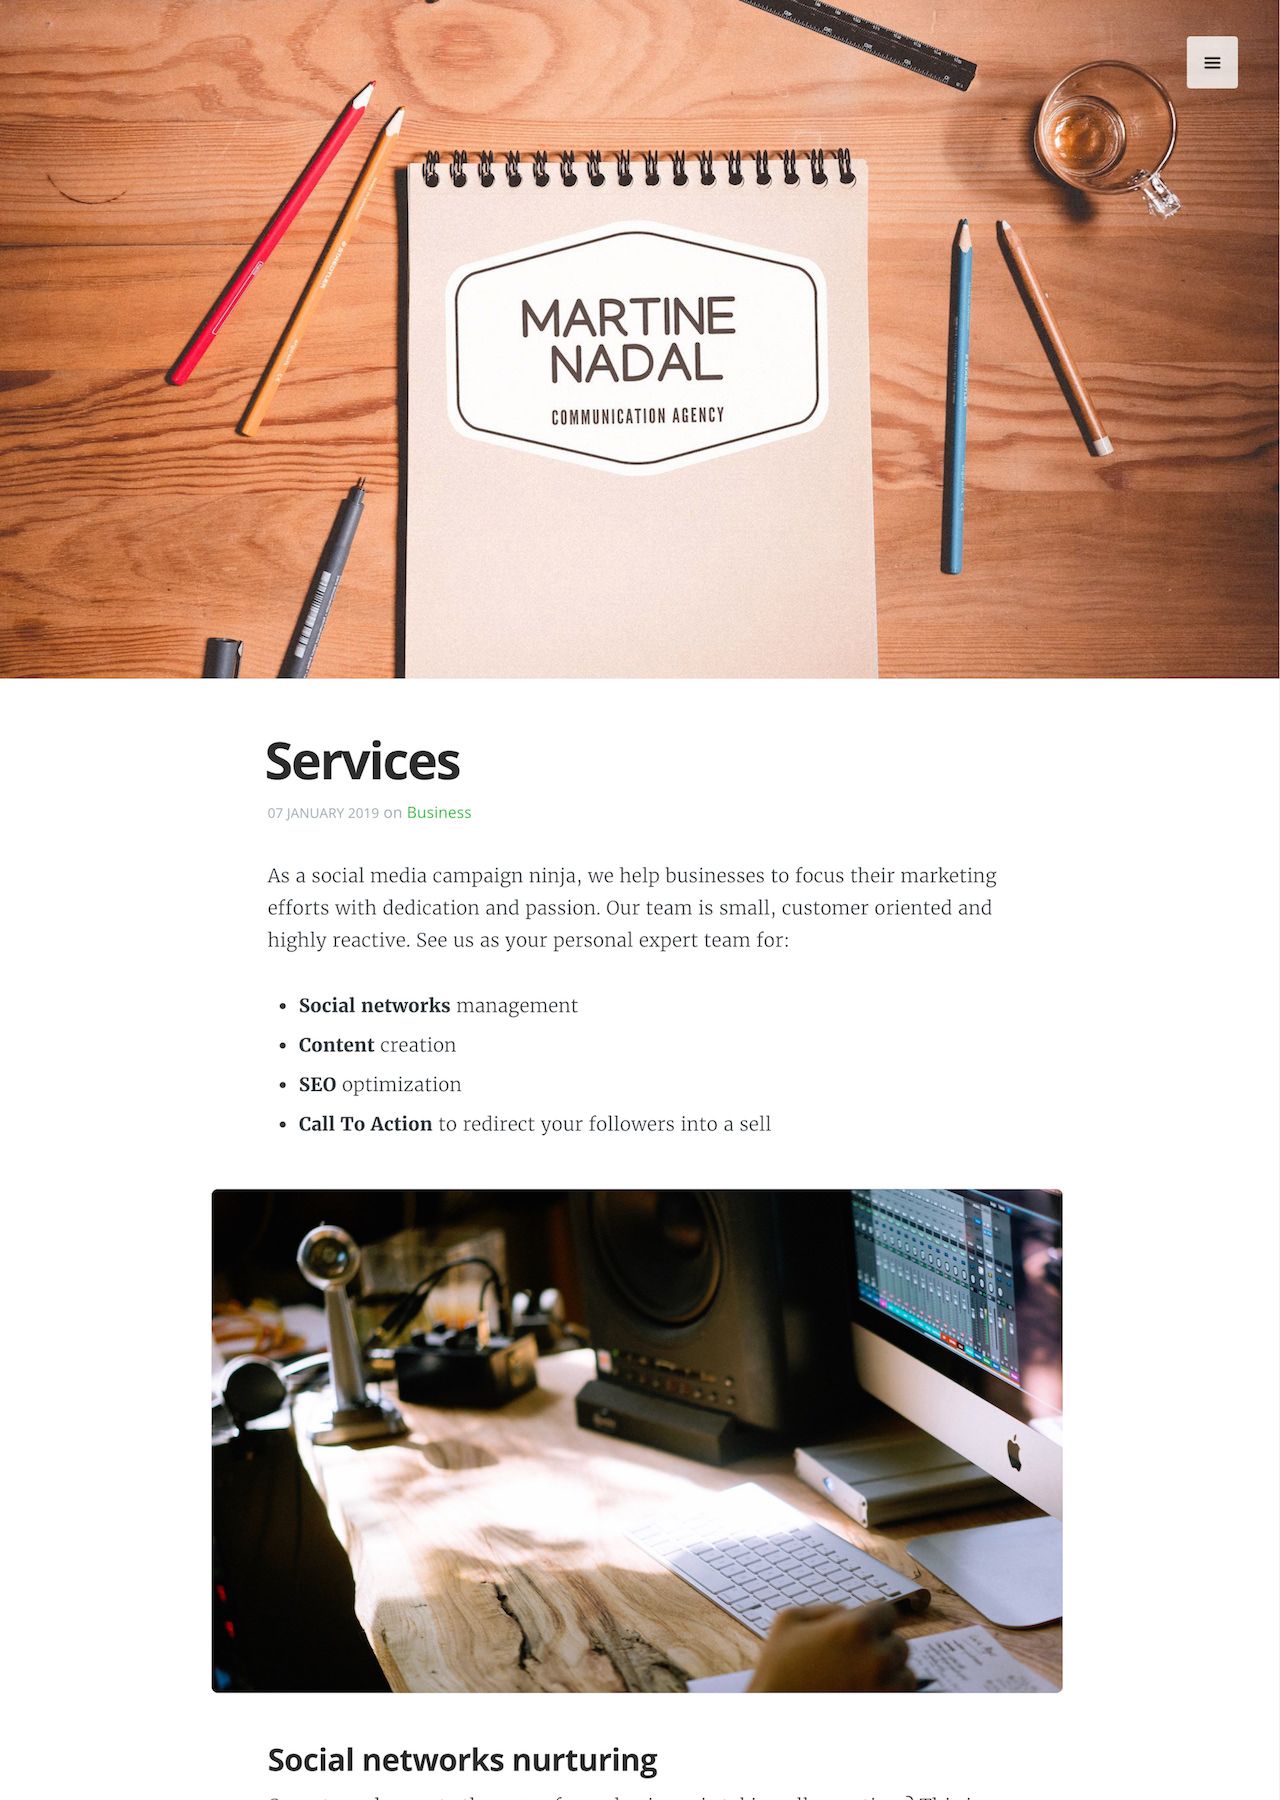 Image header ideas for your website